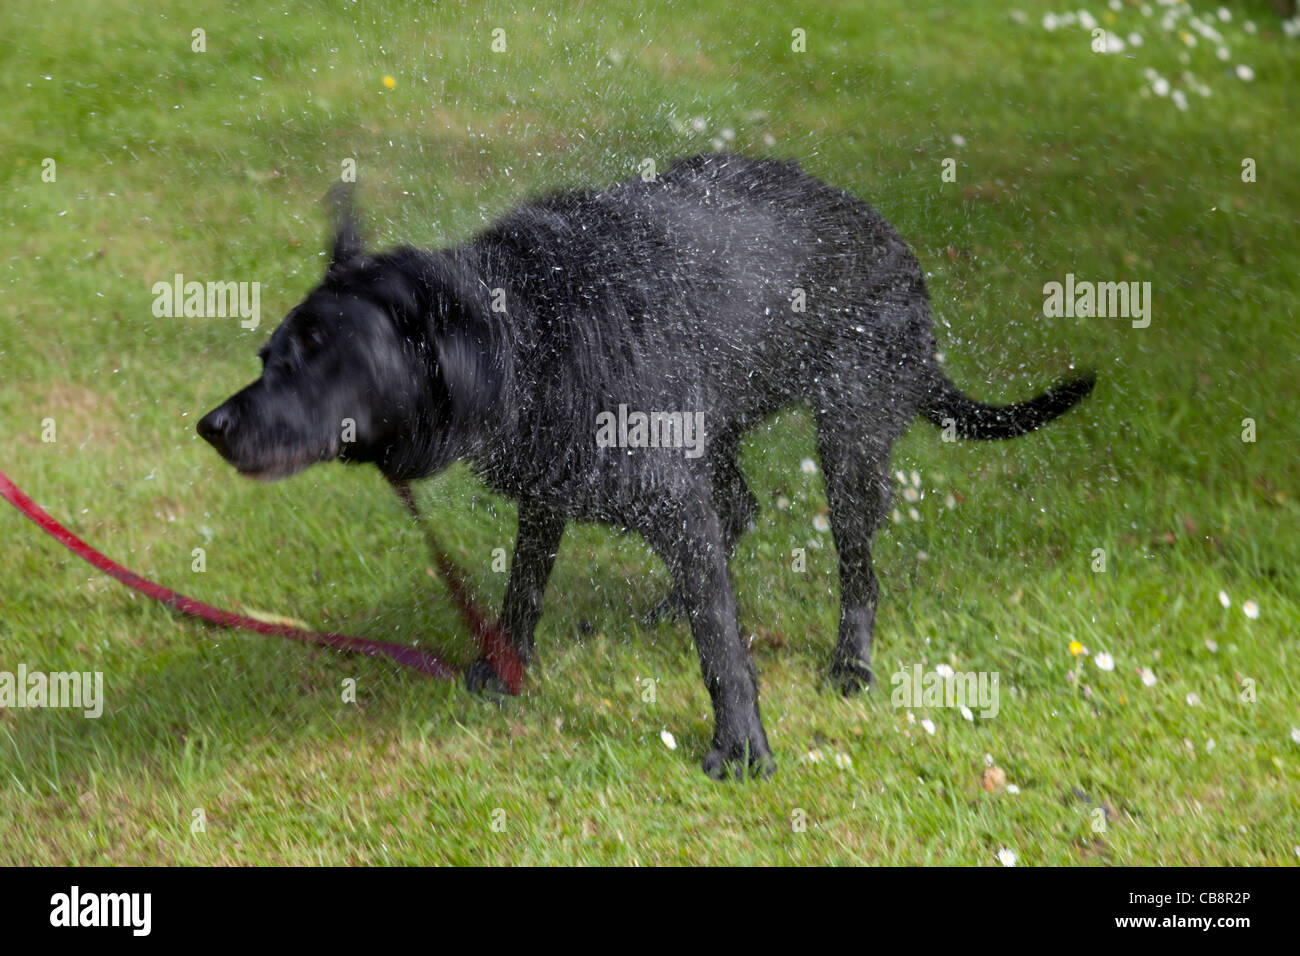 Black labrador dog shaking itself dry after getting a bath Stock Photo